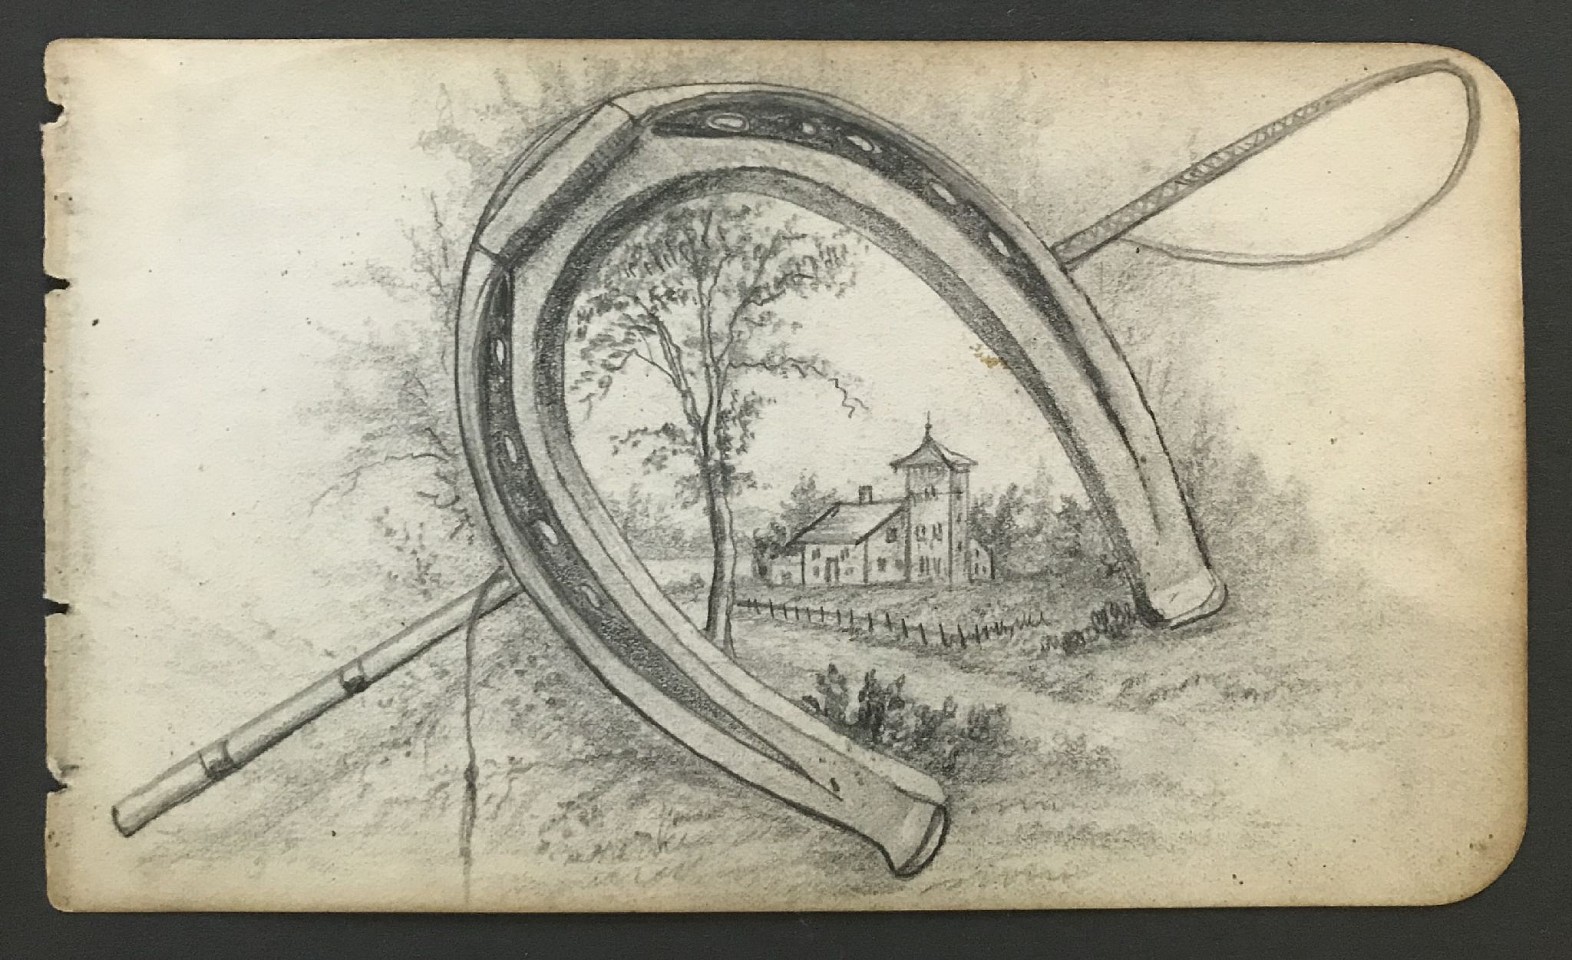 George M. Hathaway, Country Theme #4

pencil on paper, 3 3/4"" x  6 3/4""
JCA 5895.41
$350